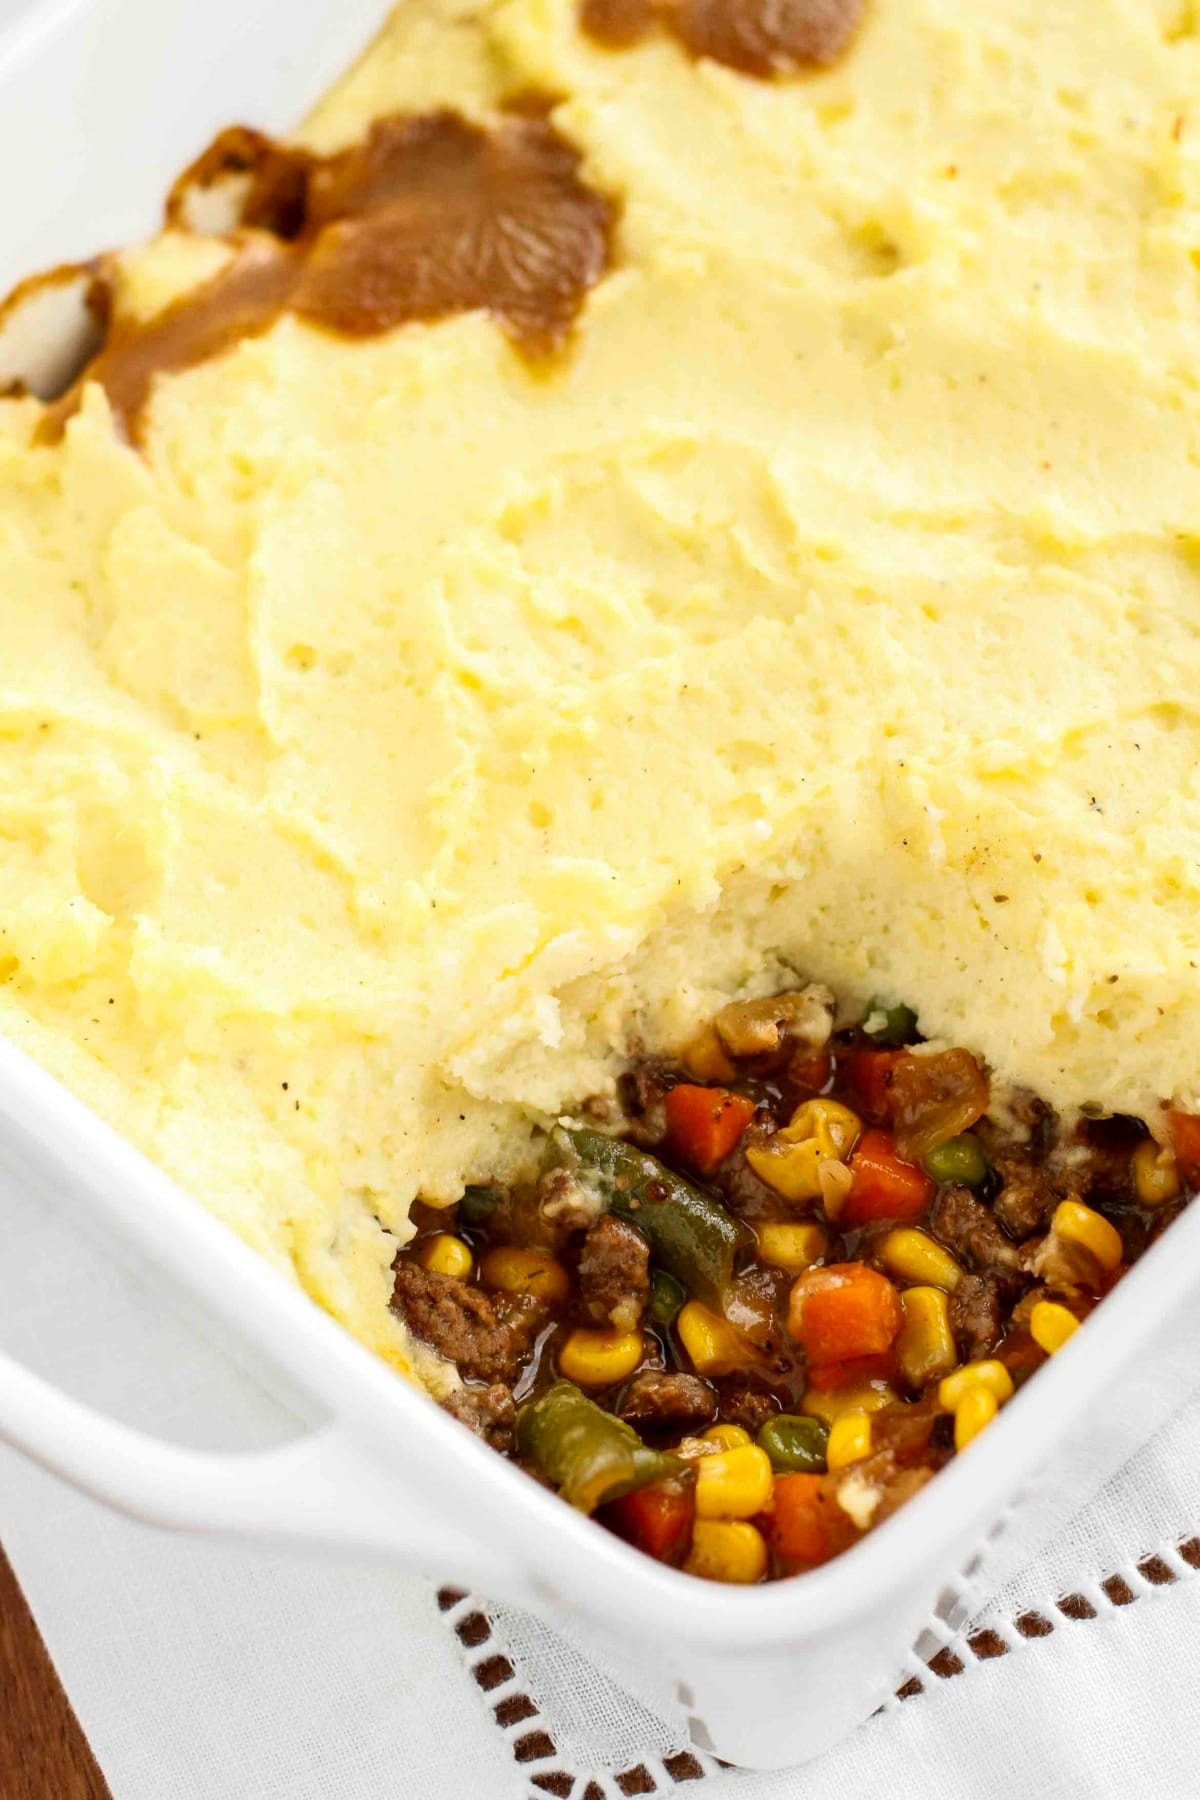 Shepherd's pie in a casserole with a portion missing showing corn, green peas, ground beef, and gravy filling.